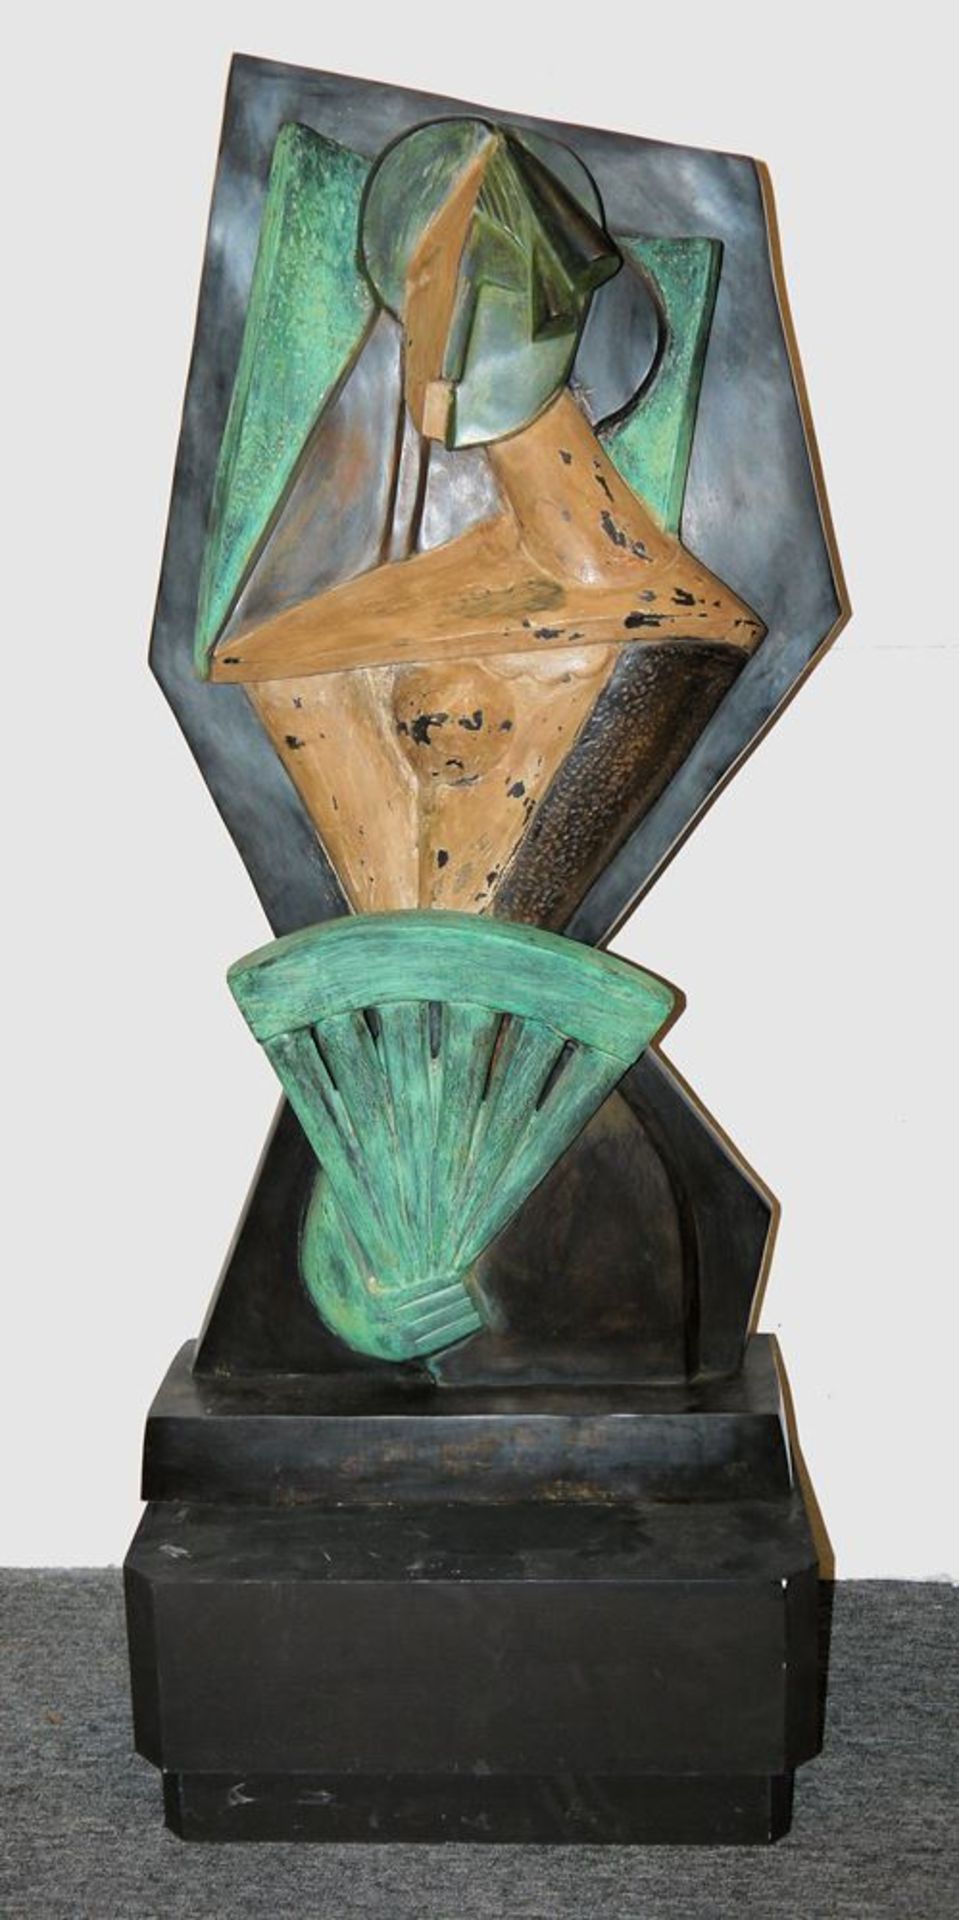 Alexander Archipenko, after, "Woman with fan", large painted bronze cast & Picturesque, expressive 